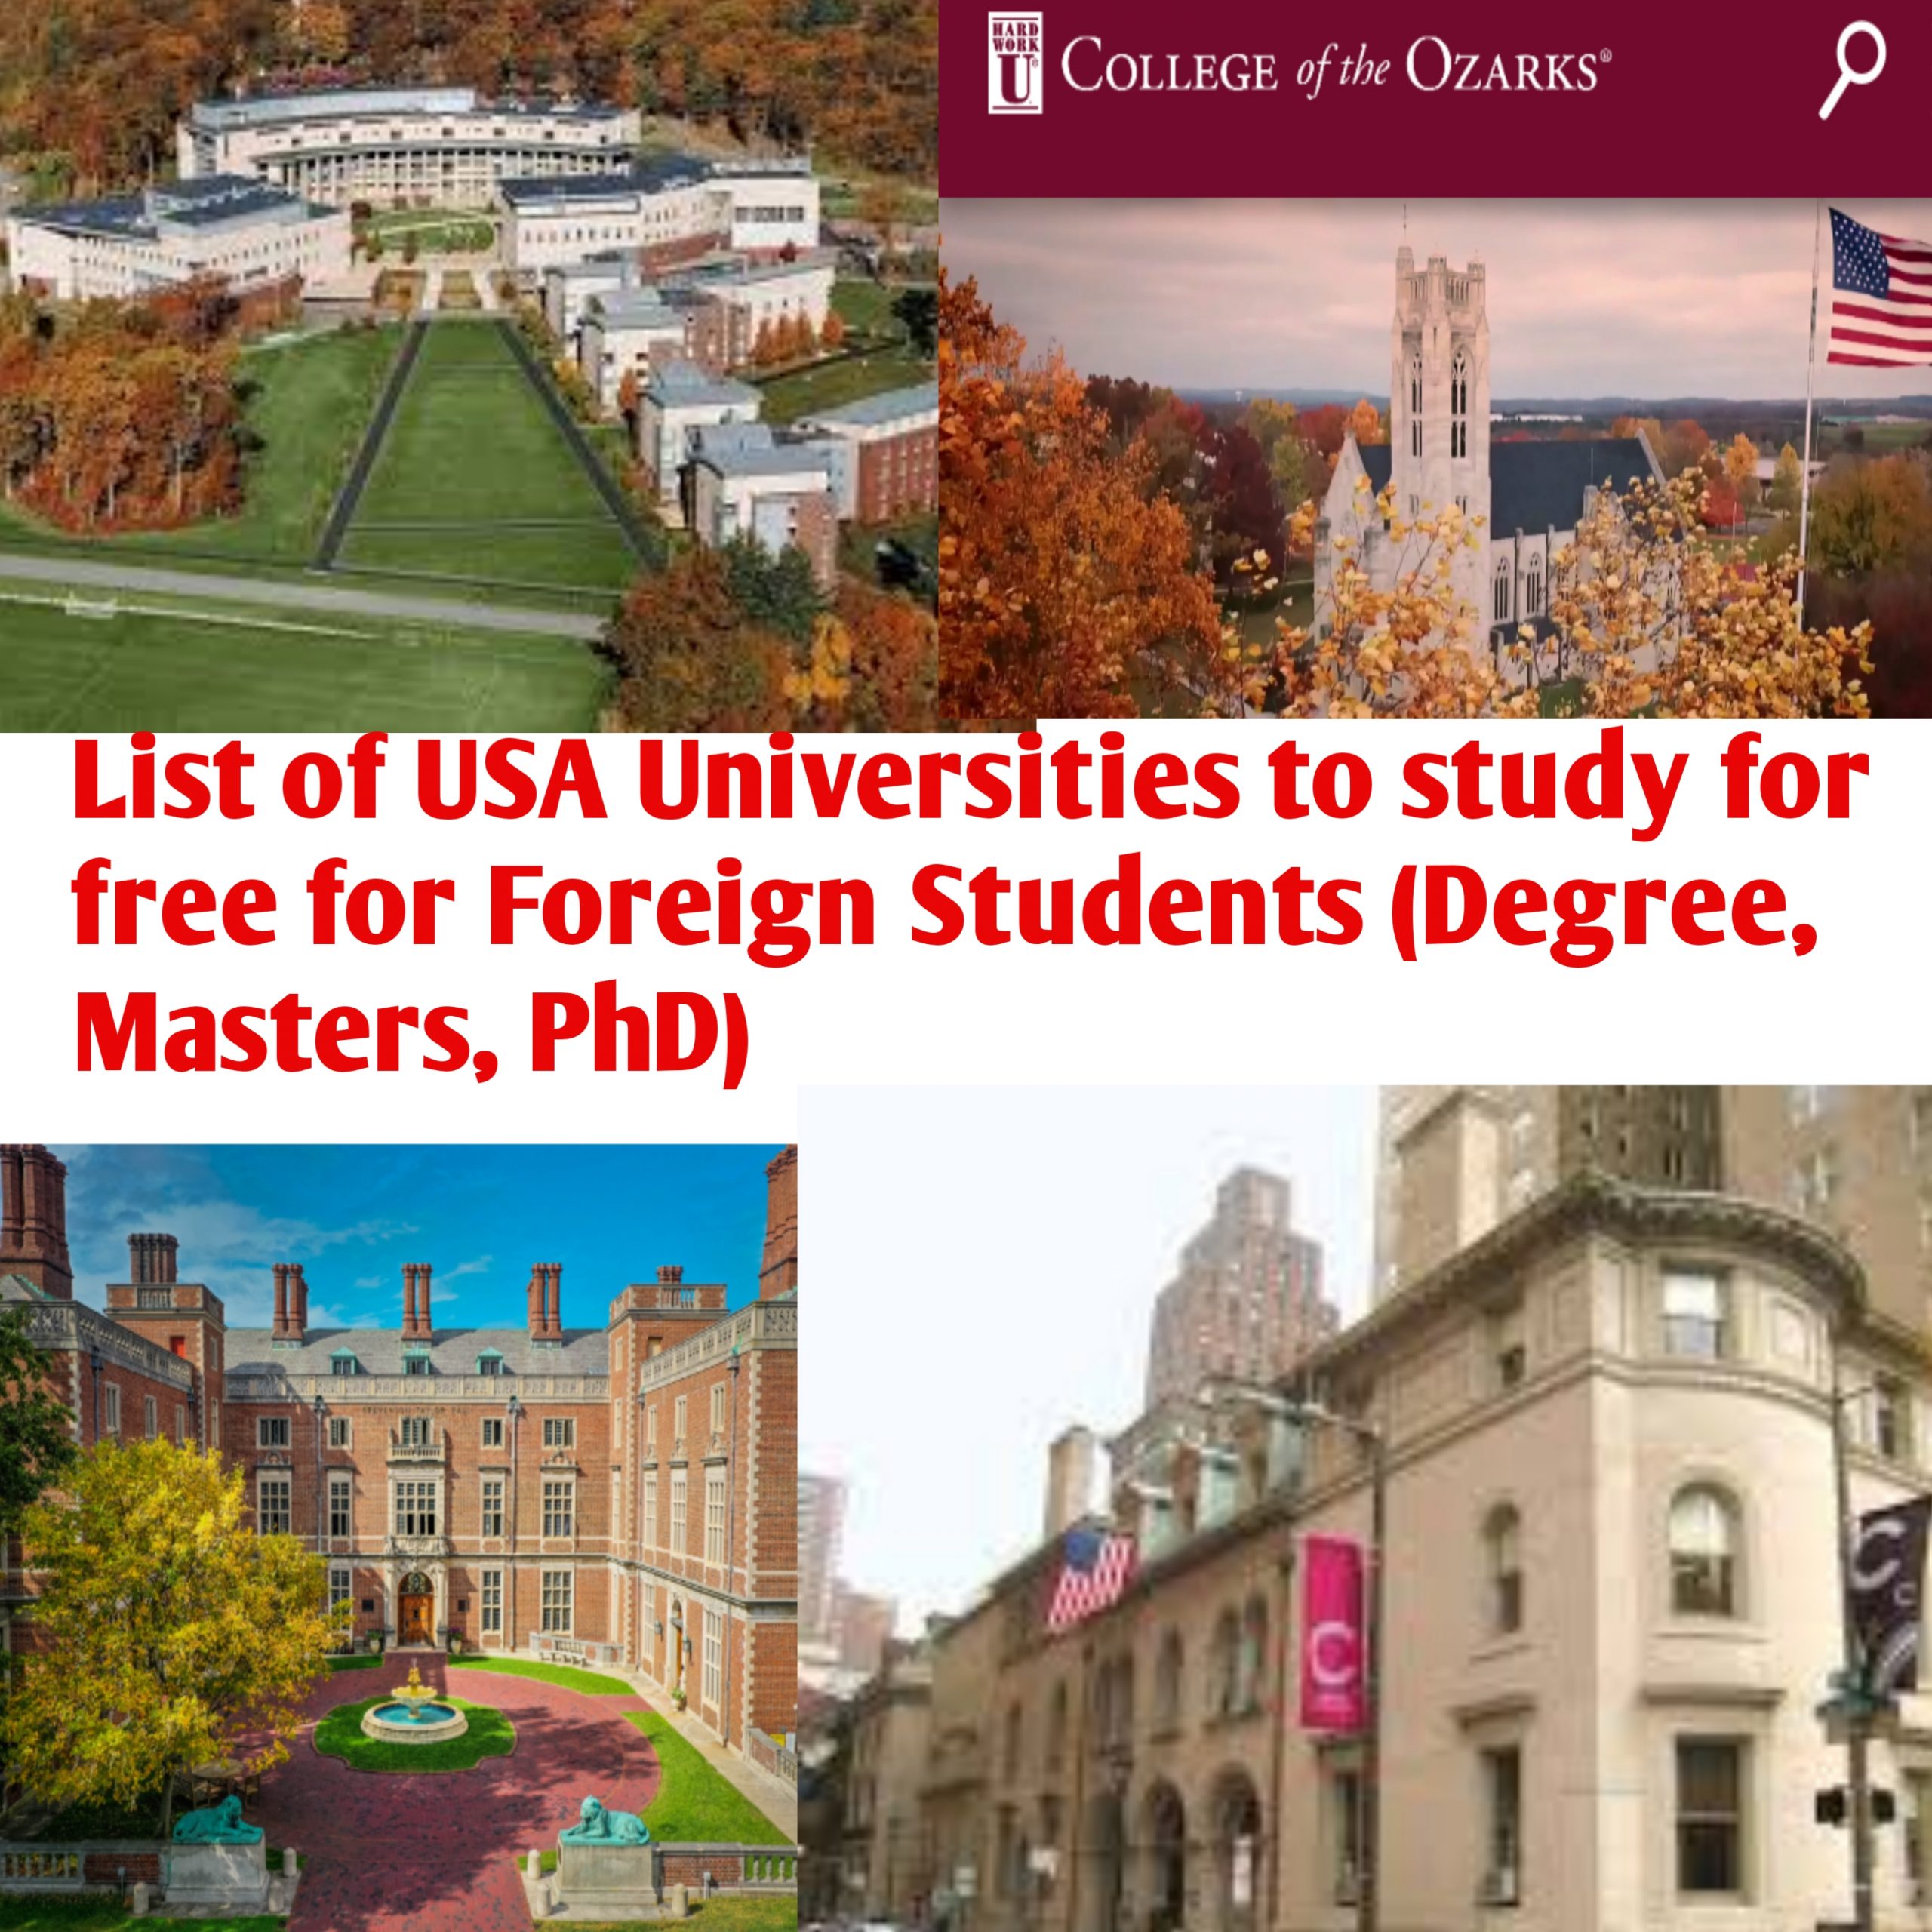 20220924 153409 scaled - List of USA Universities to study for free for Foreign Students (Degree, Masters, PhD)